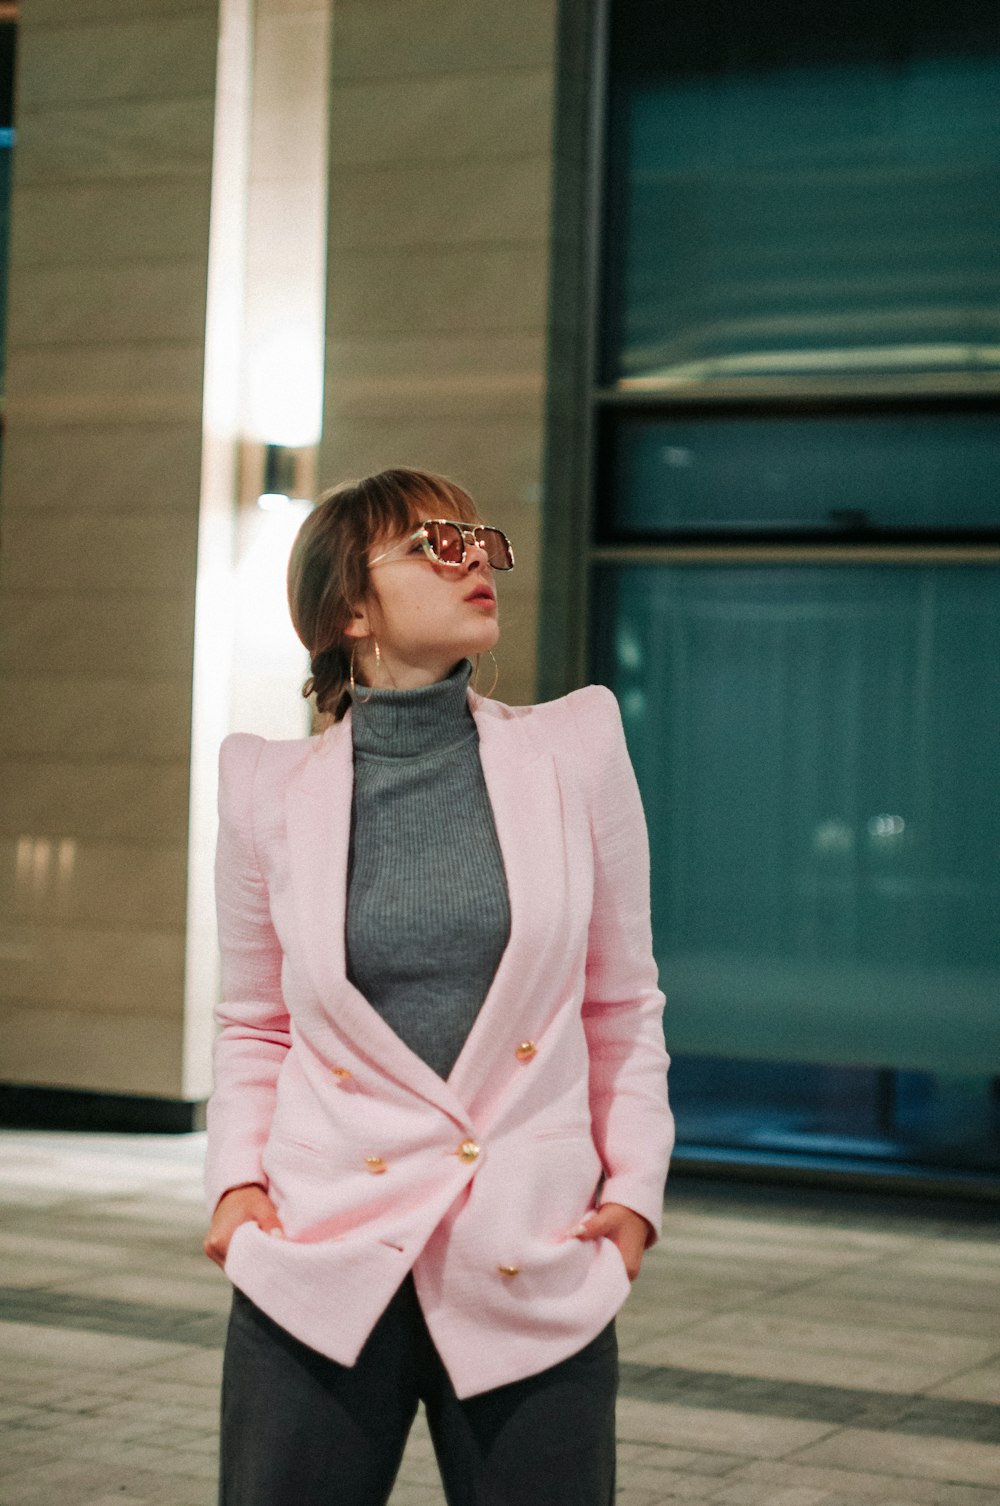 a woman wearing a pink jacket and sunglasses